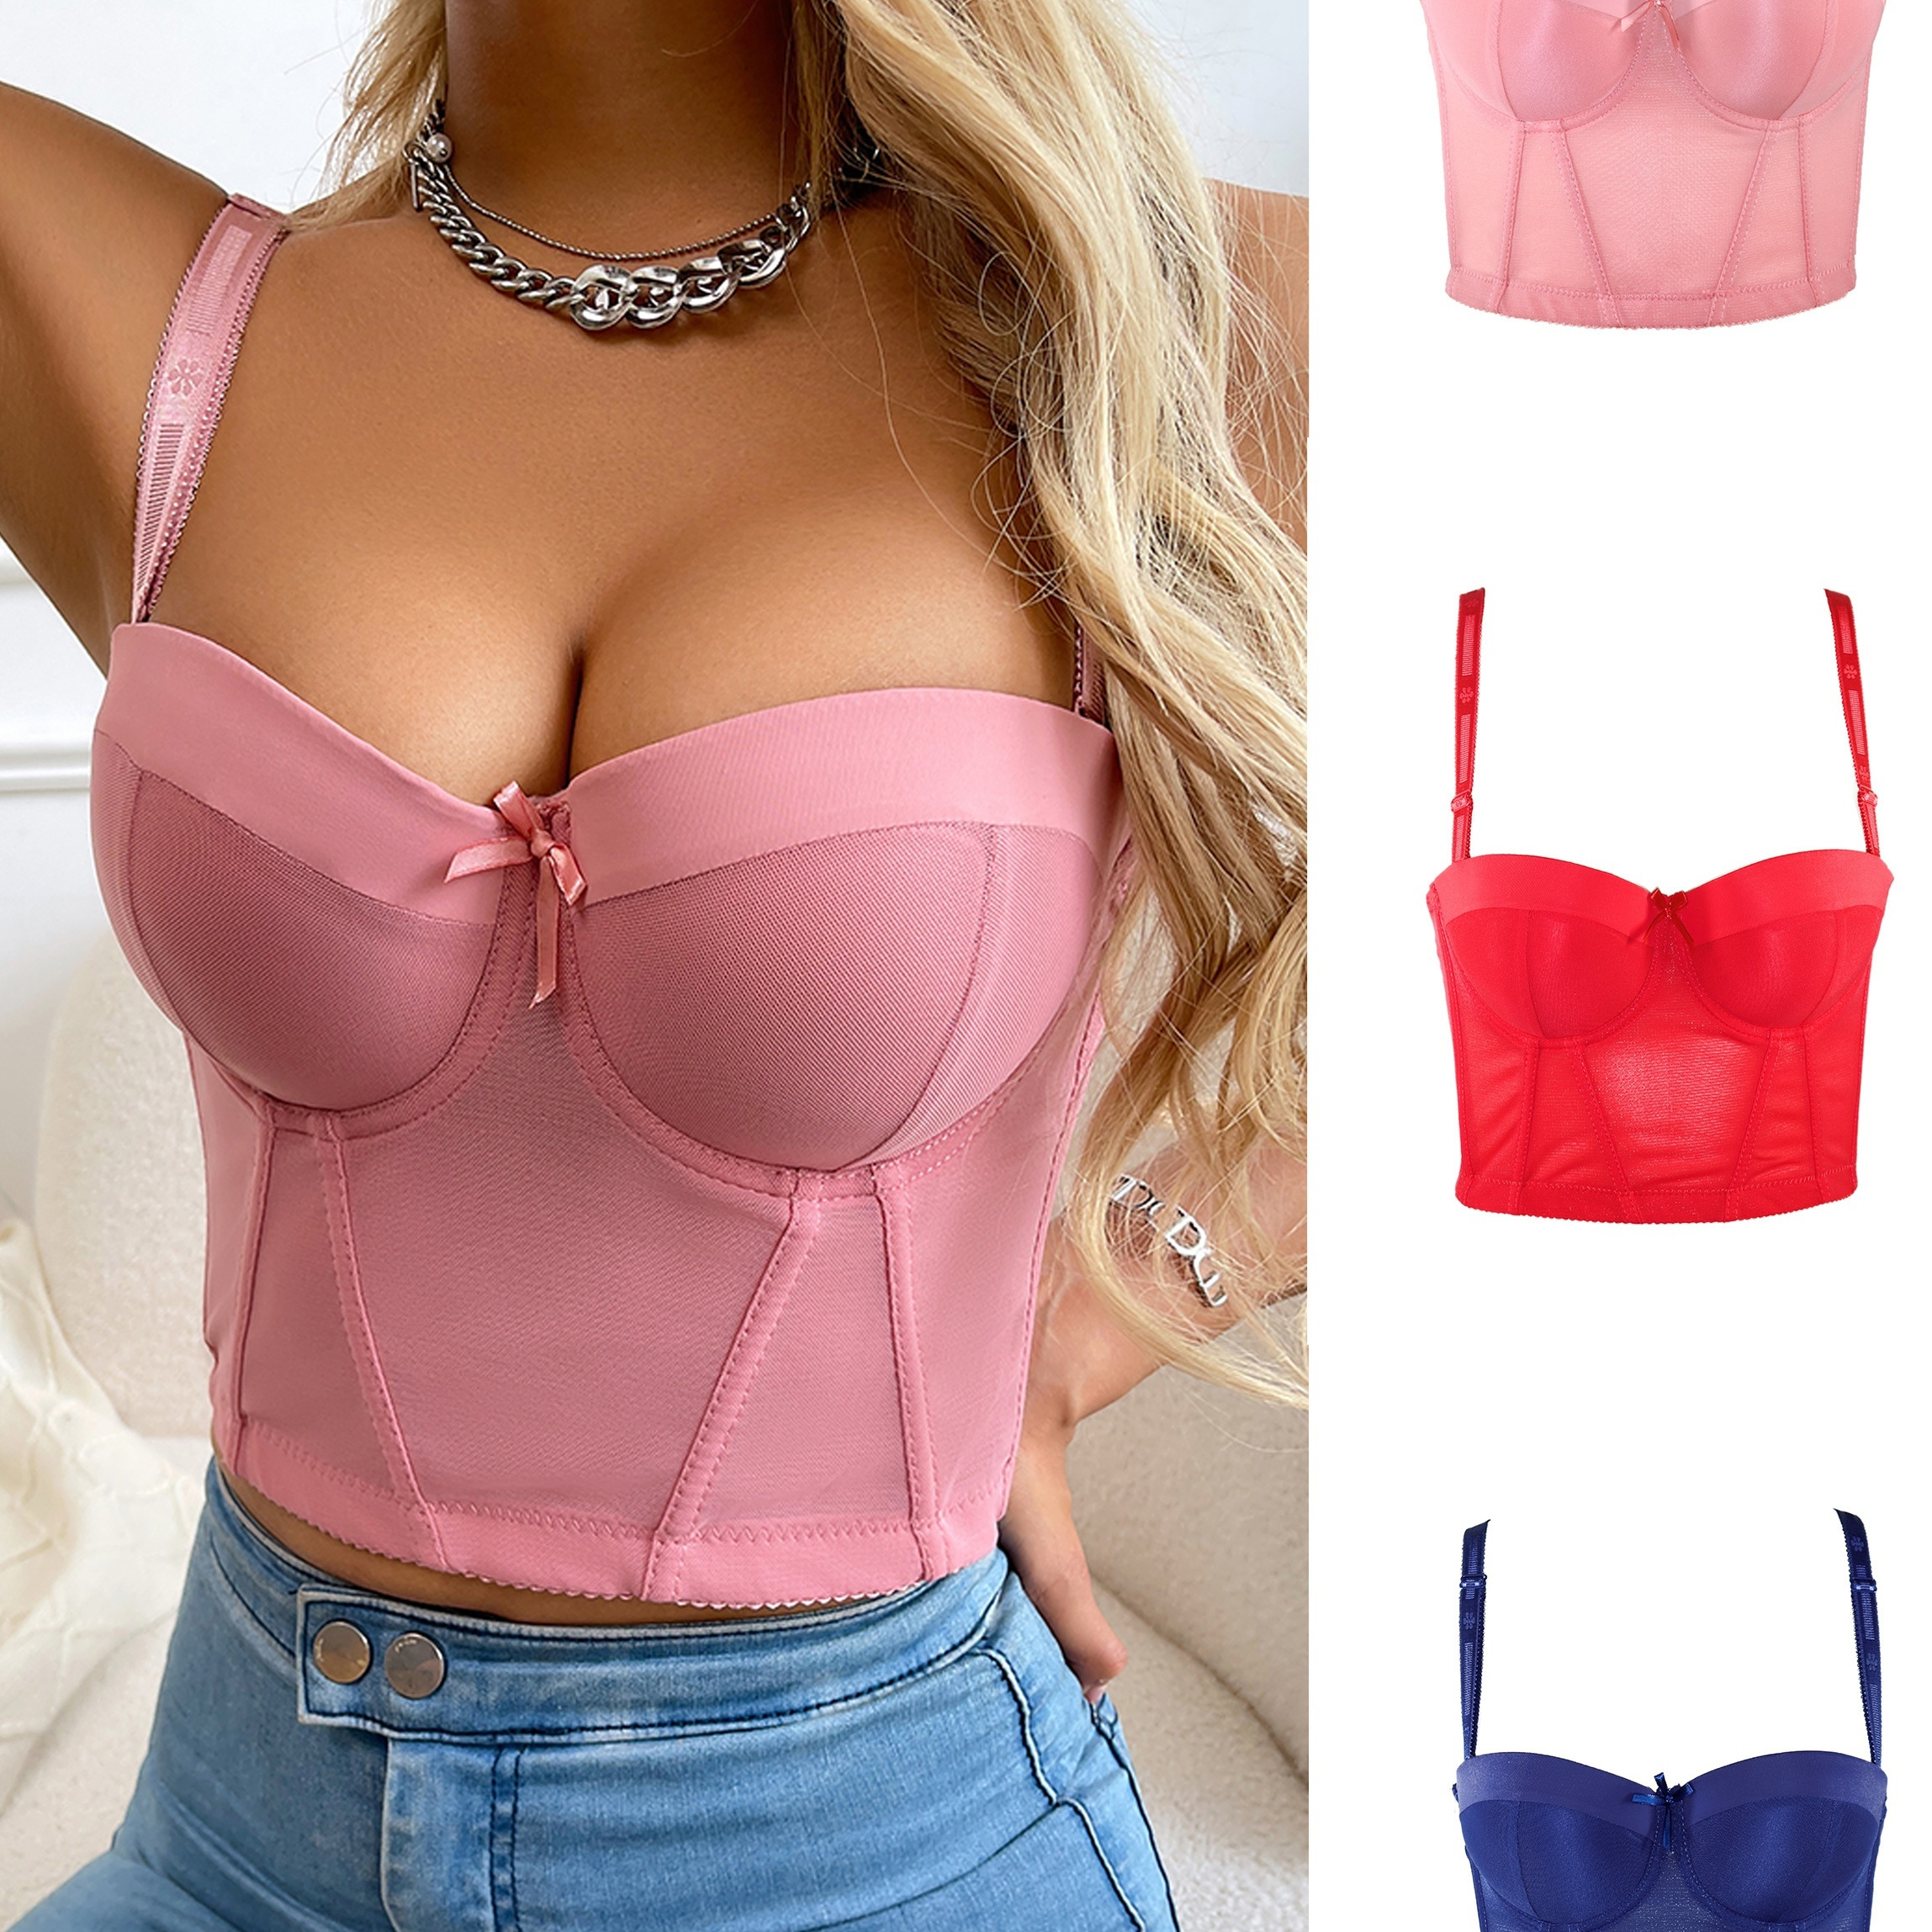 TQWQT Women Deep Cup Bra Corset Top Bustier Padded Underwire Bra Add One  Cup,Pink M 